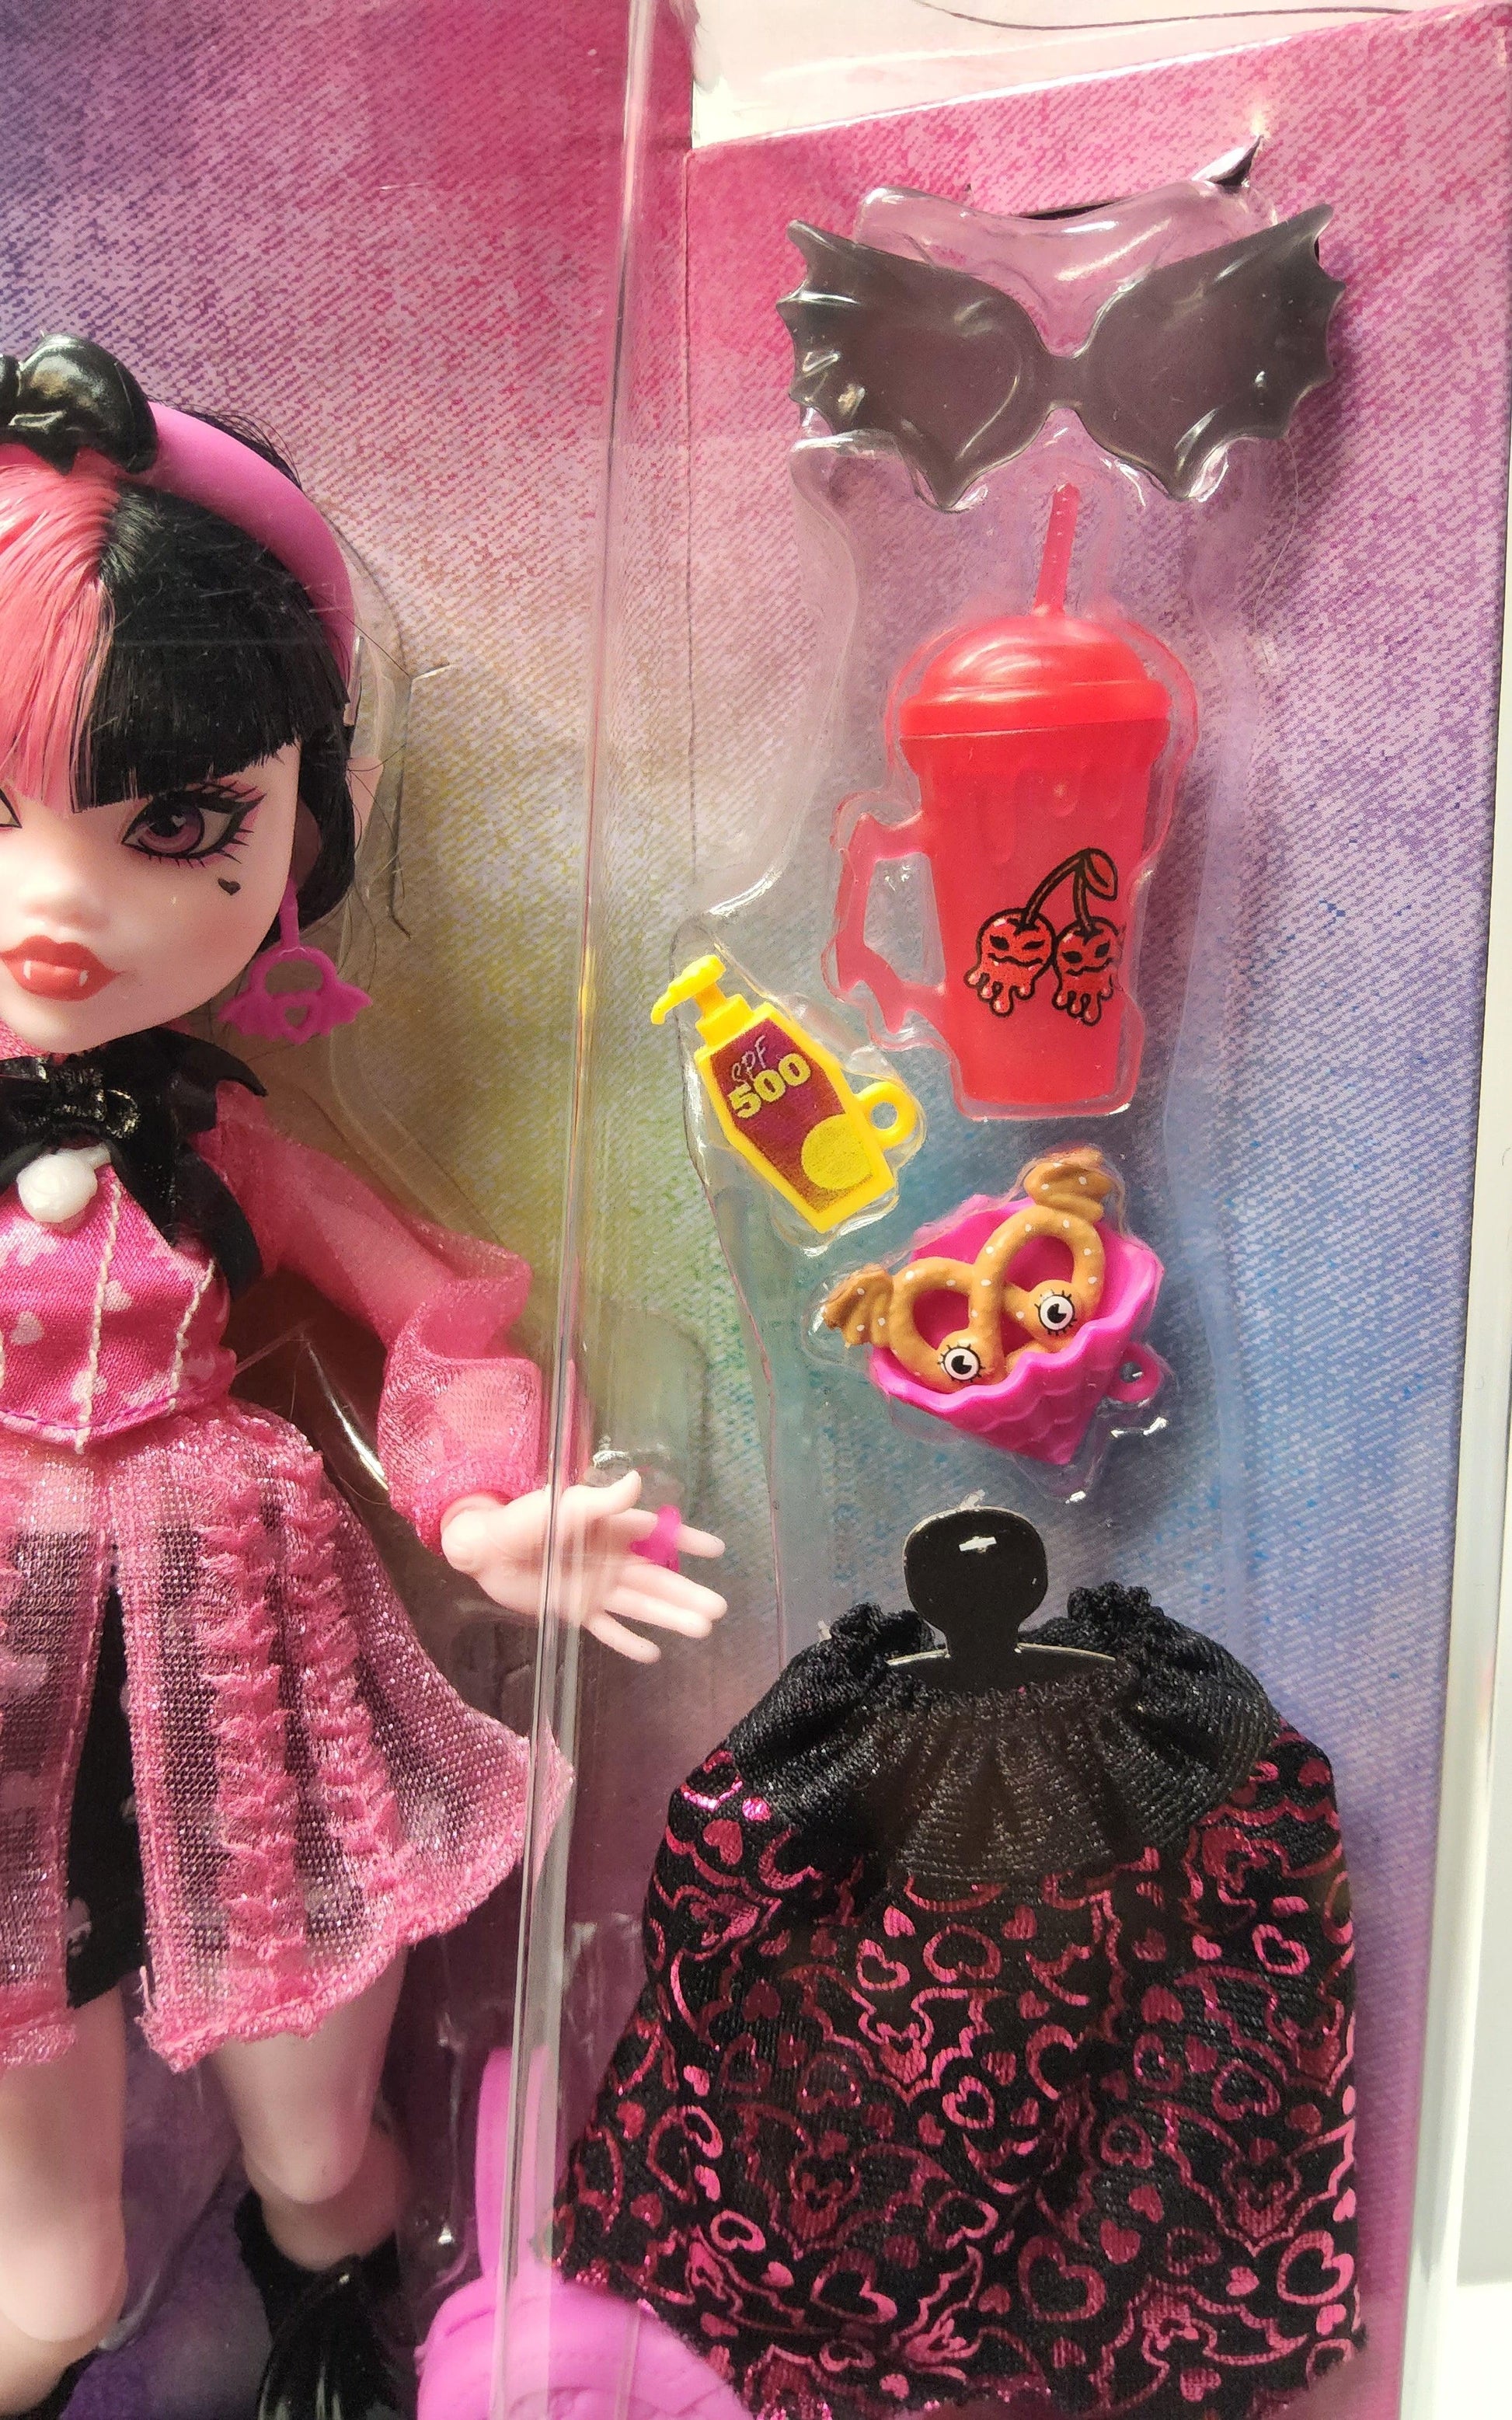 Monster High Doll, Frankie Stein with Accessories and Pet